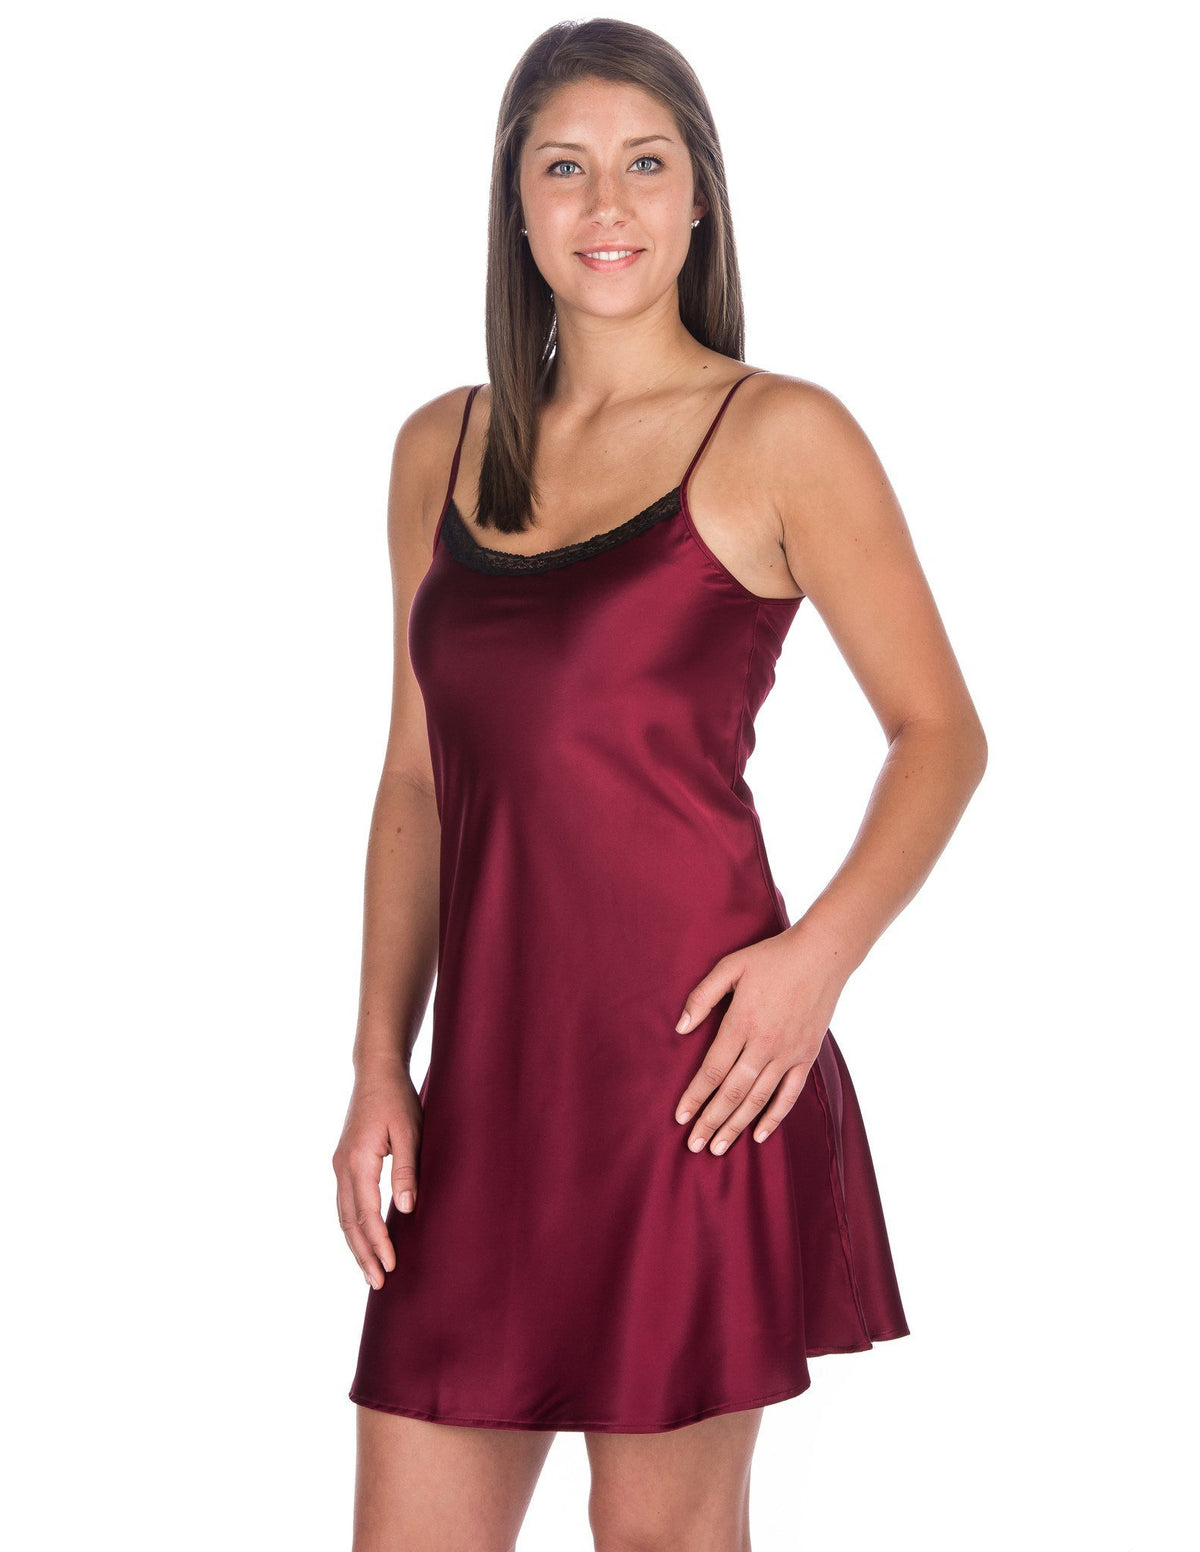 Women's Premium Satin Chemise/Nightgown with Lace Accent - Wine